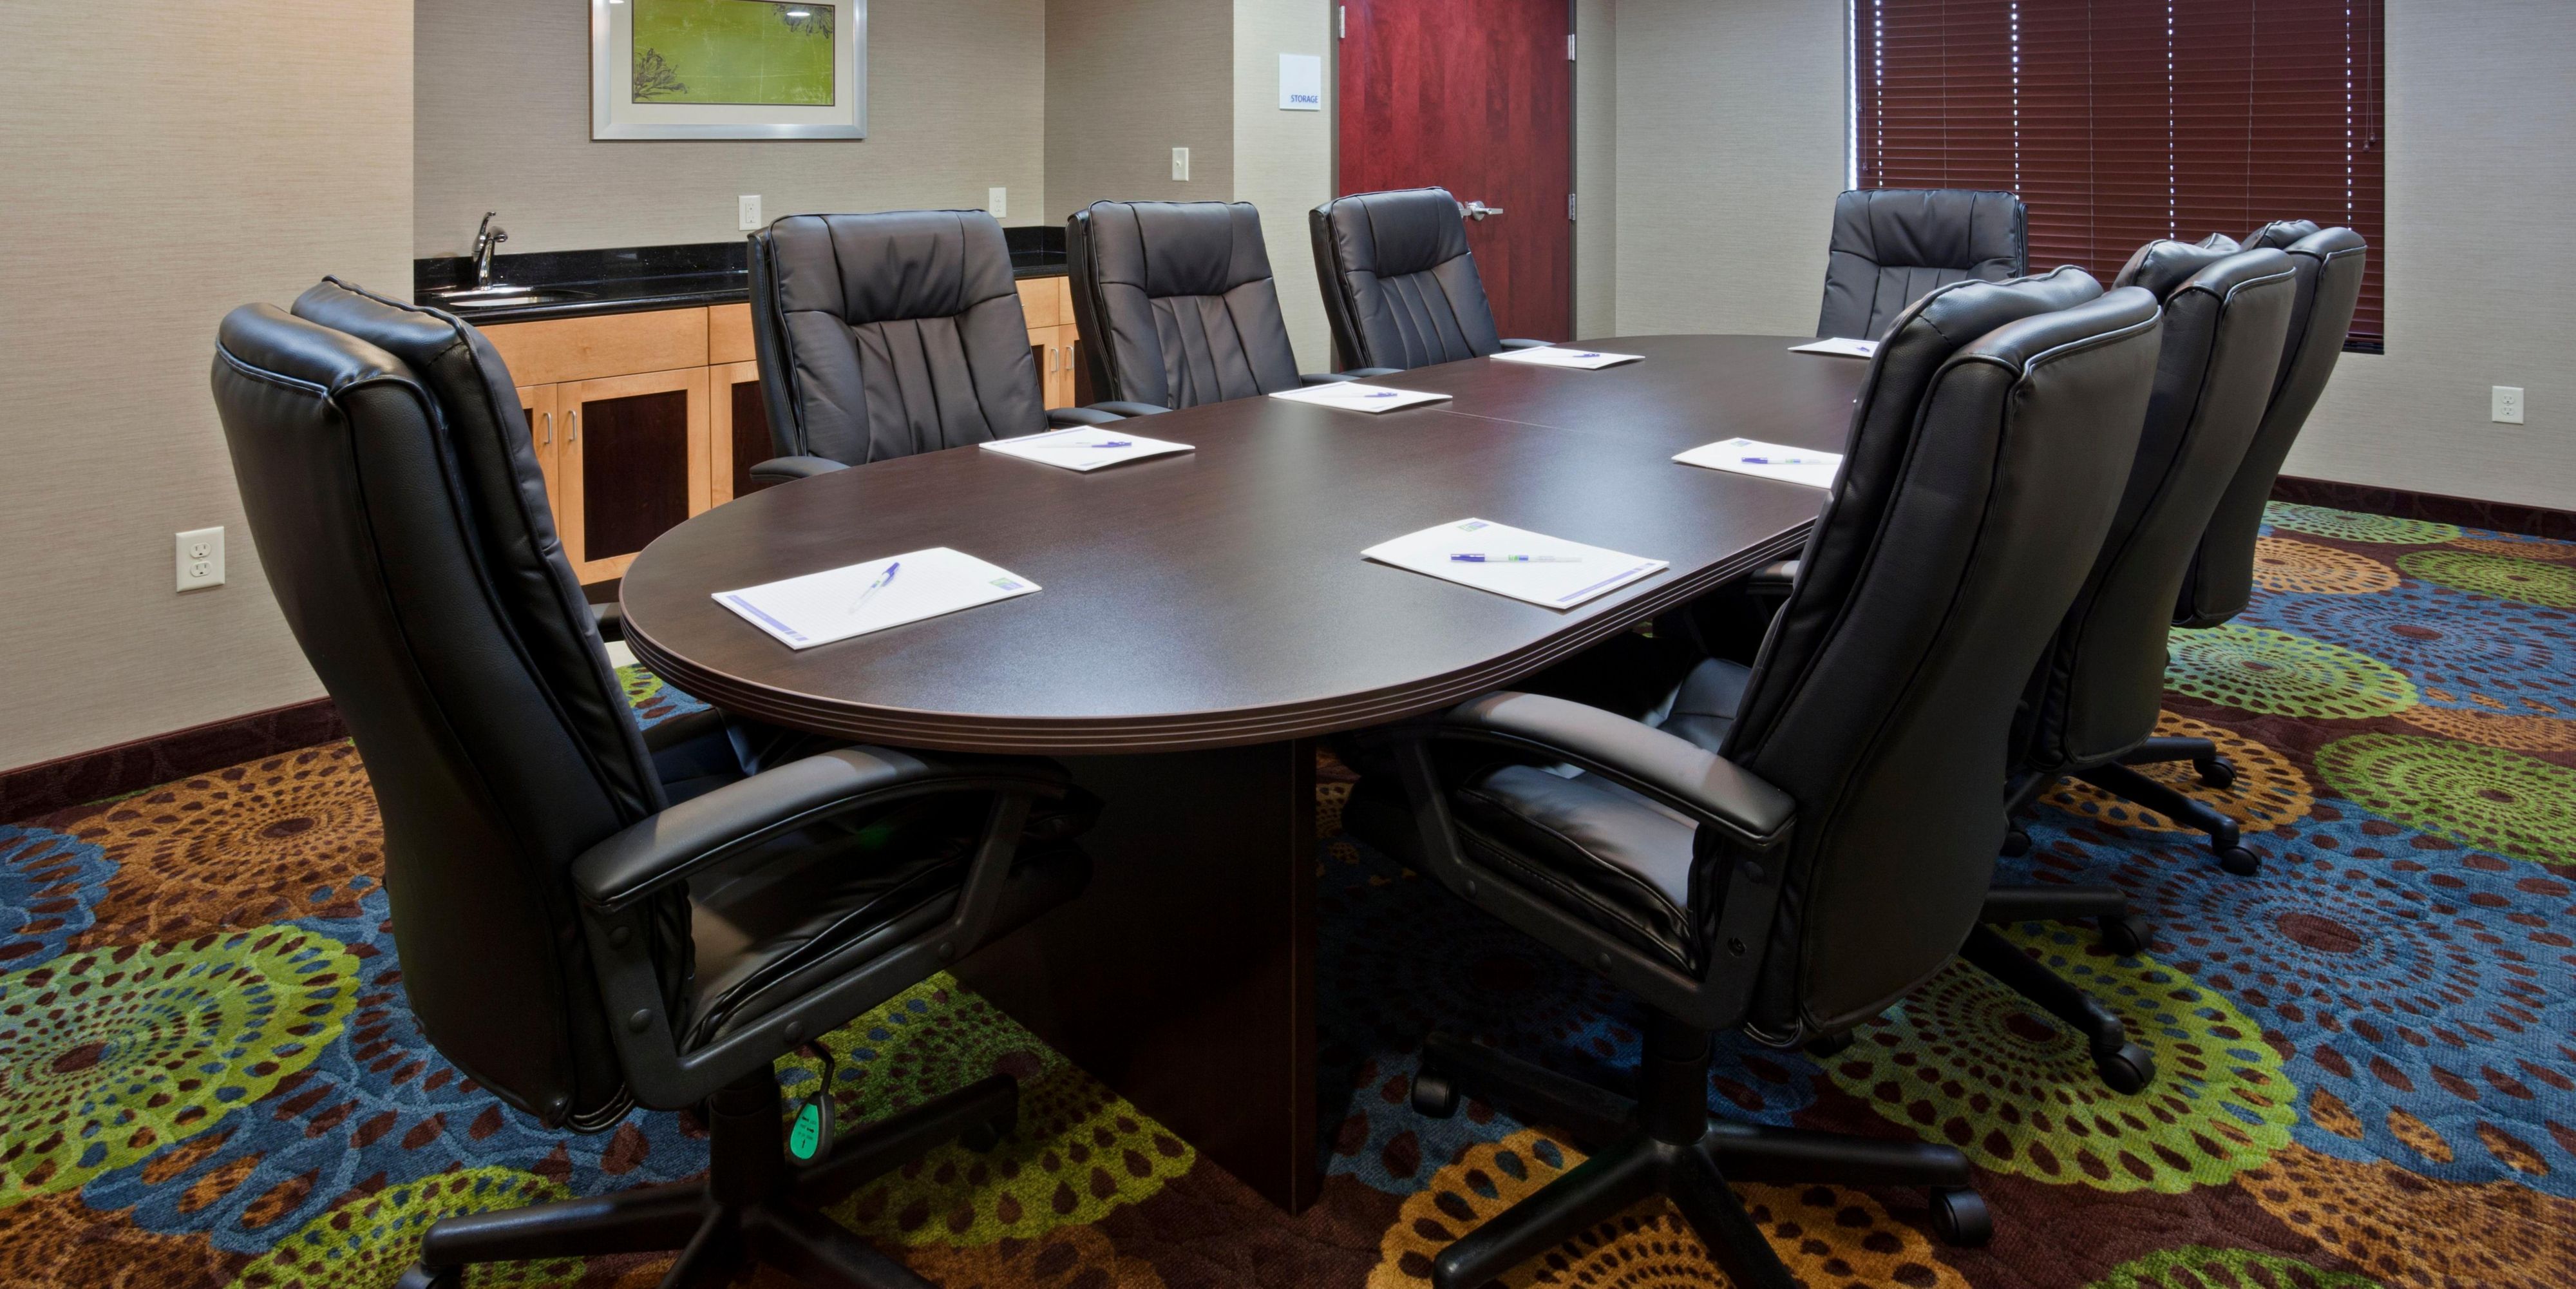 Need to host an event in Rochester, MN? We have you covered. Our meeting space allows you to have small gatherings and be just minutes from Mayo Clinic. 